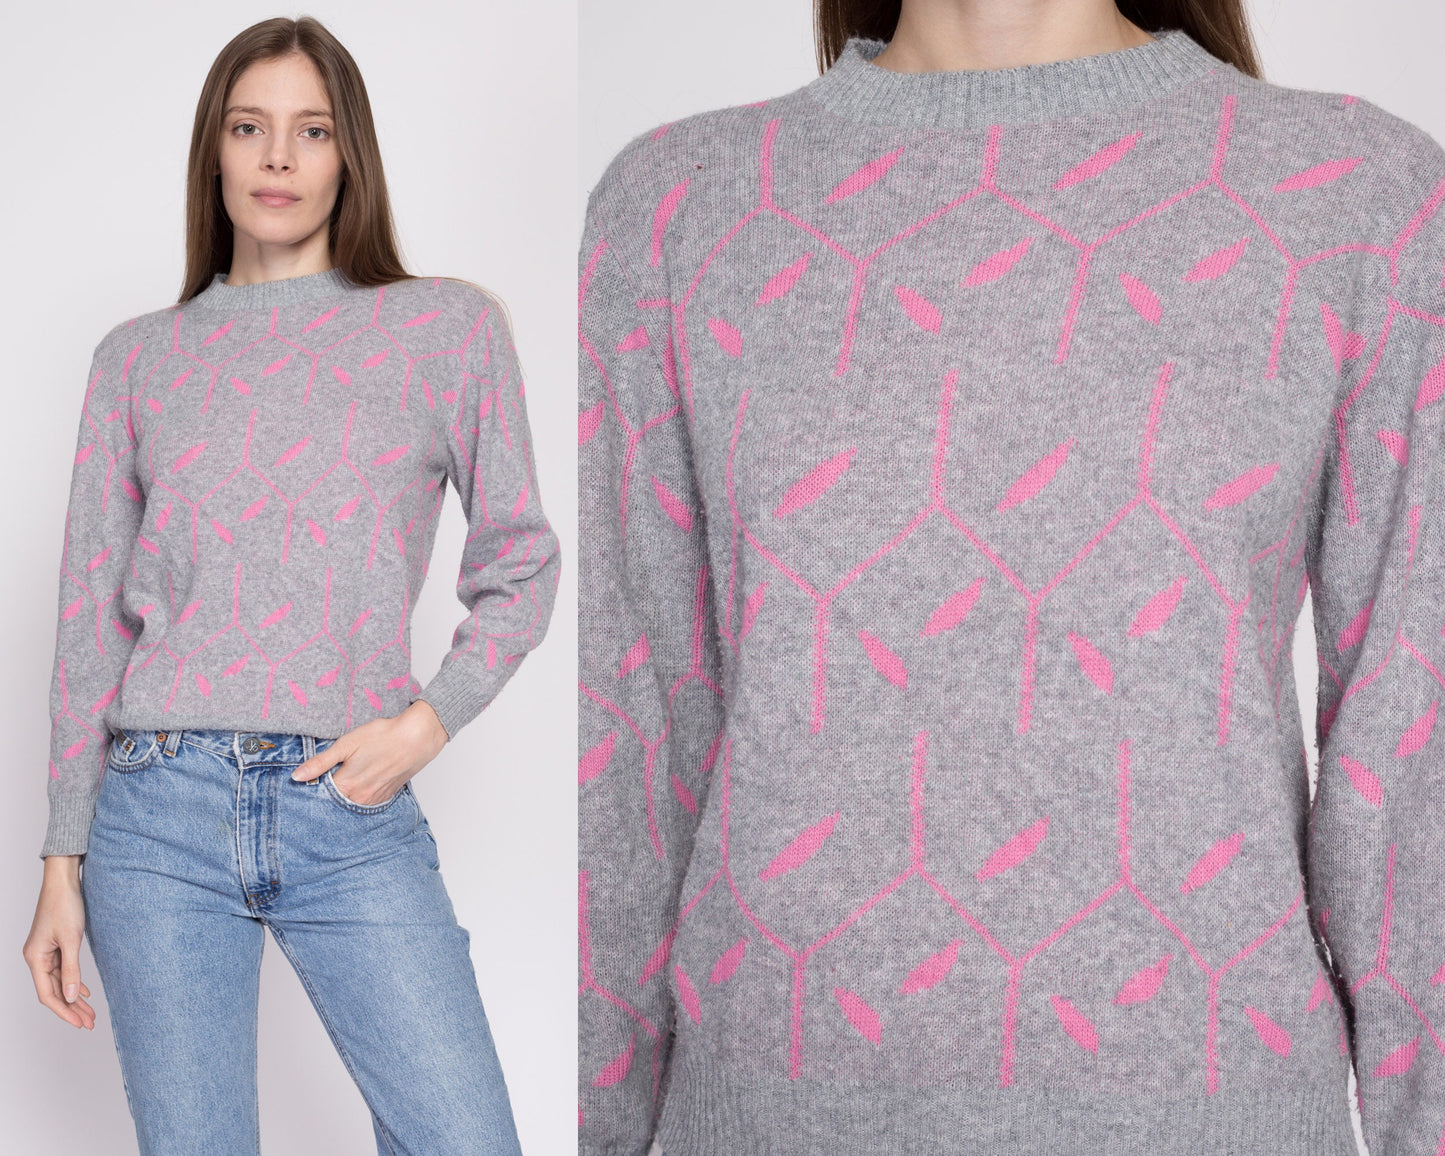 80s Teasers Abstract Knit Sweater - Medium | Vintage Grey & Pink Geometric Pattern Girly Pullover